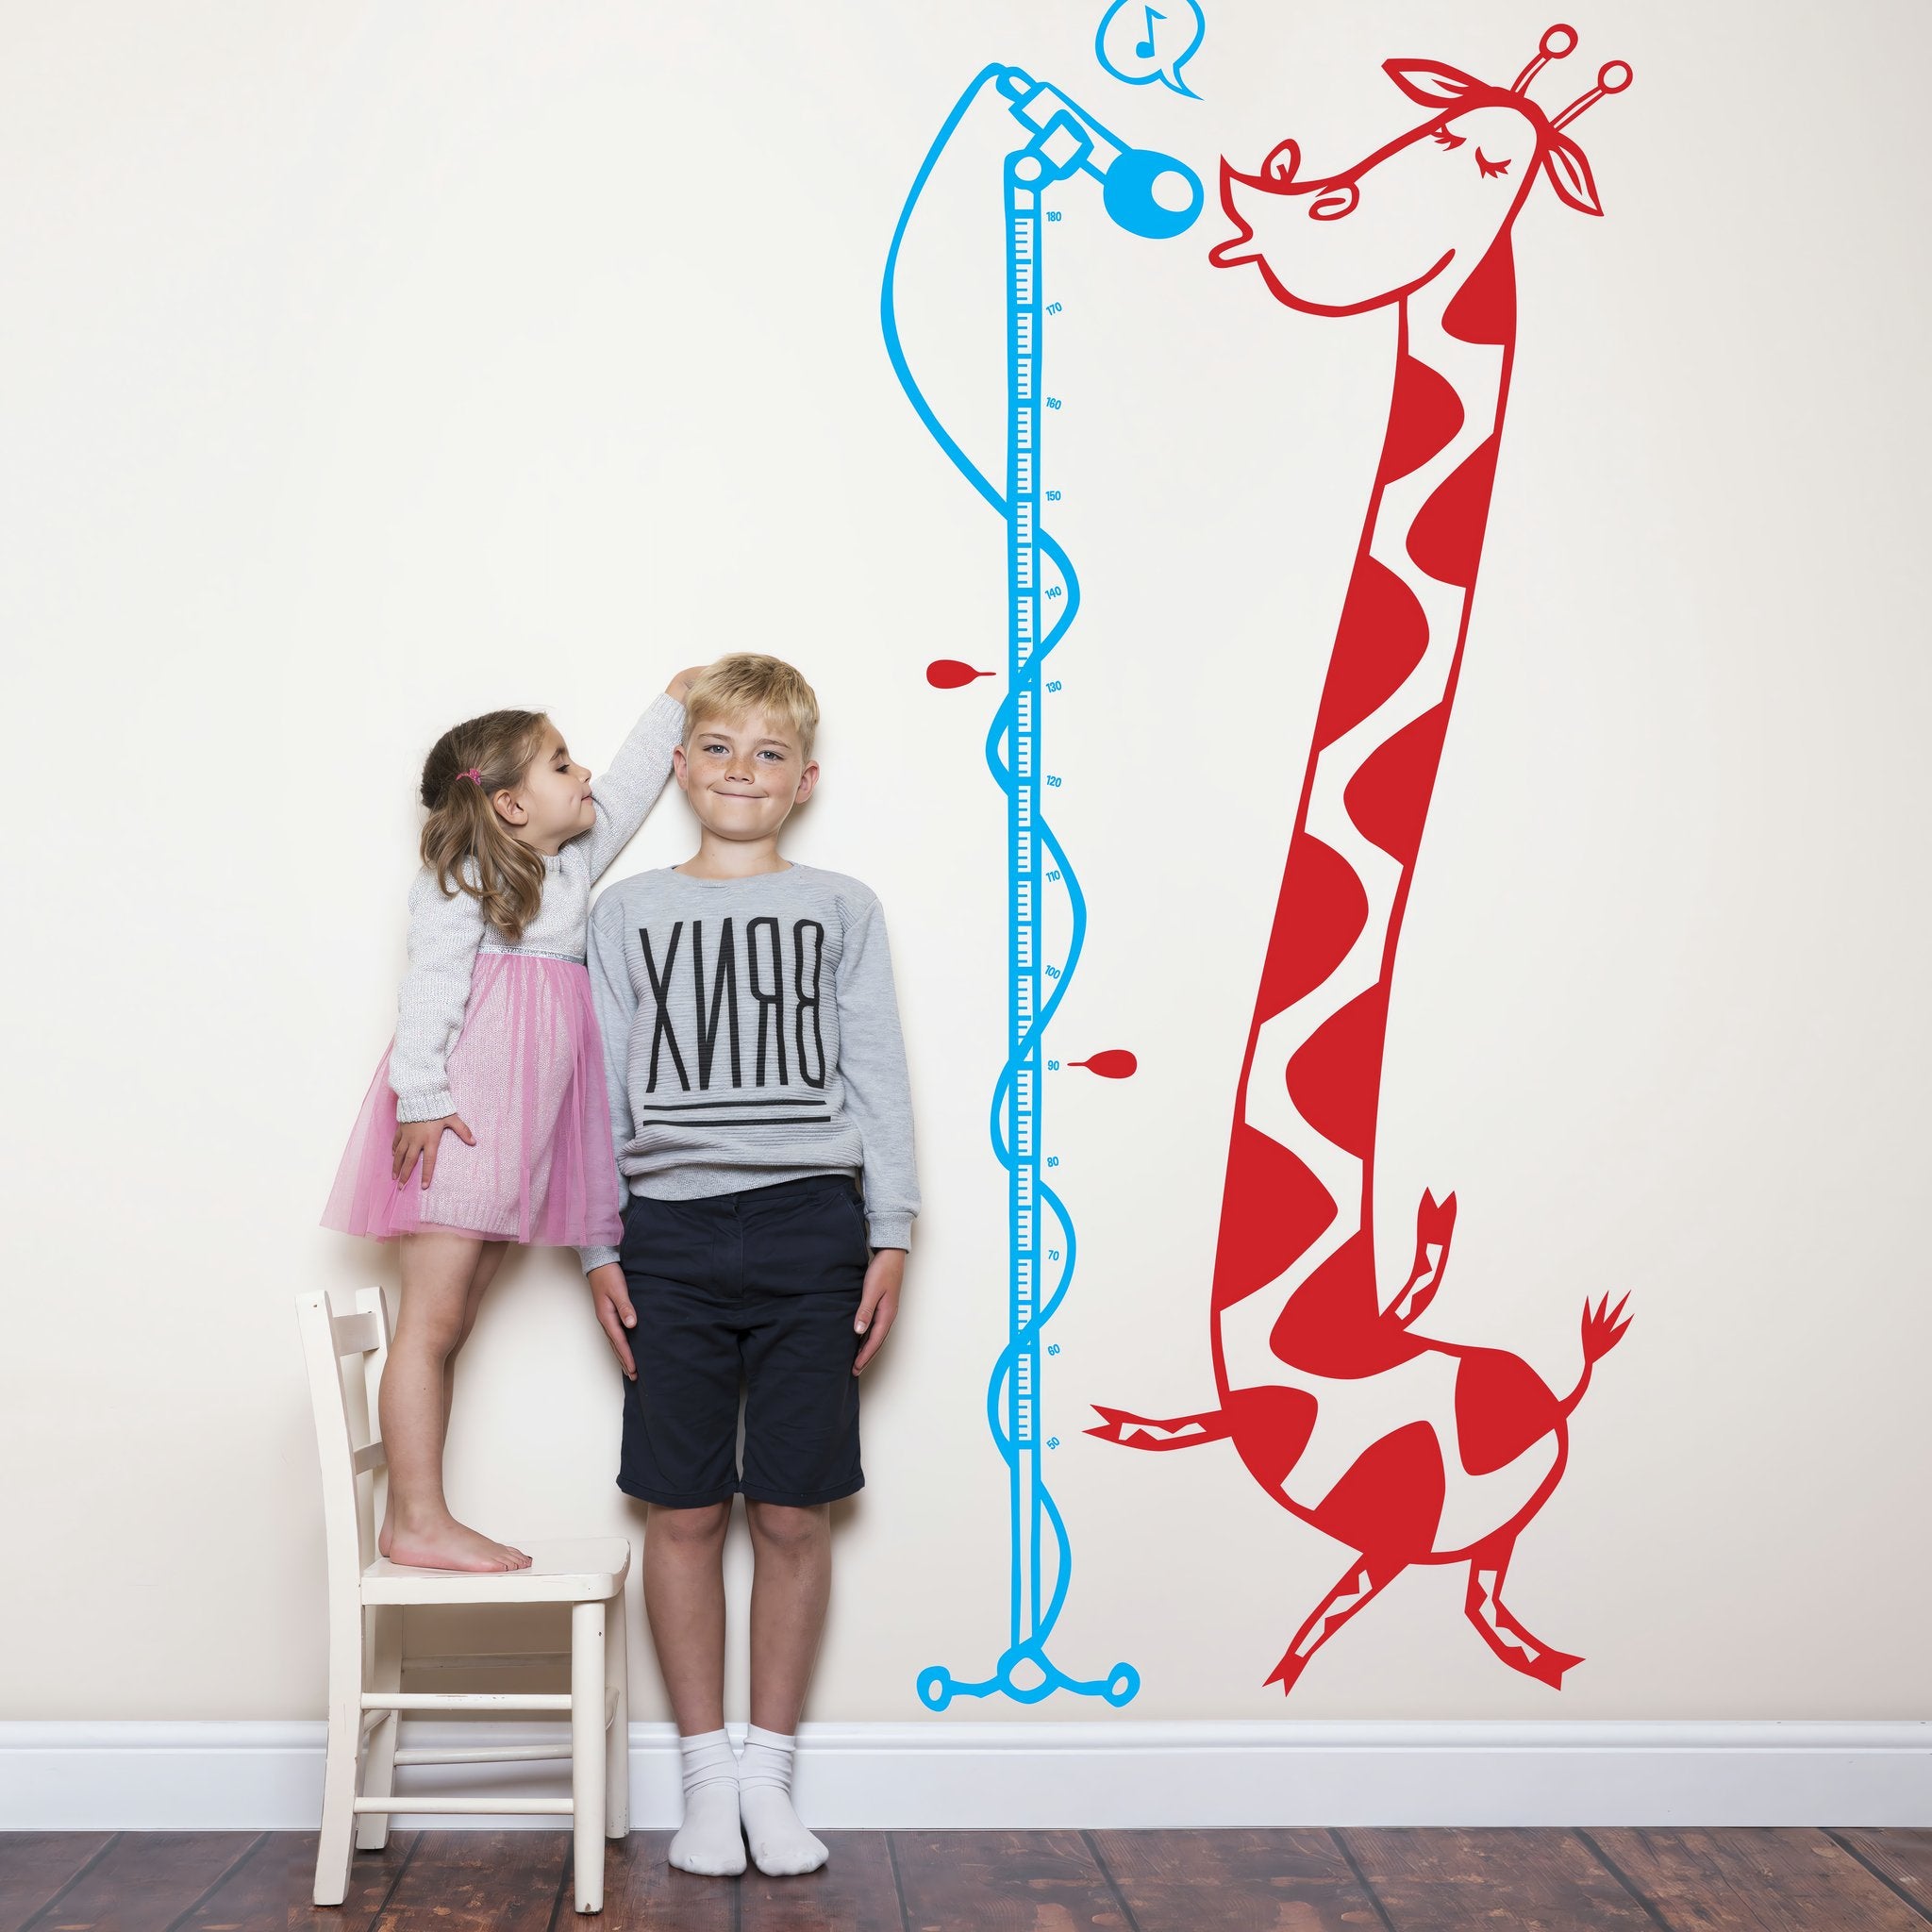 Height chart wall sticker of a giraffe singing into a microphone with a young boy and girl nearby.